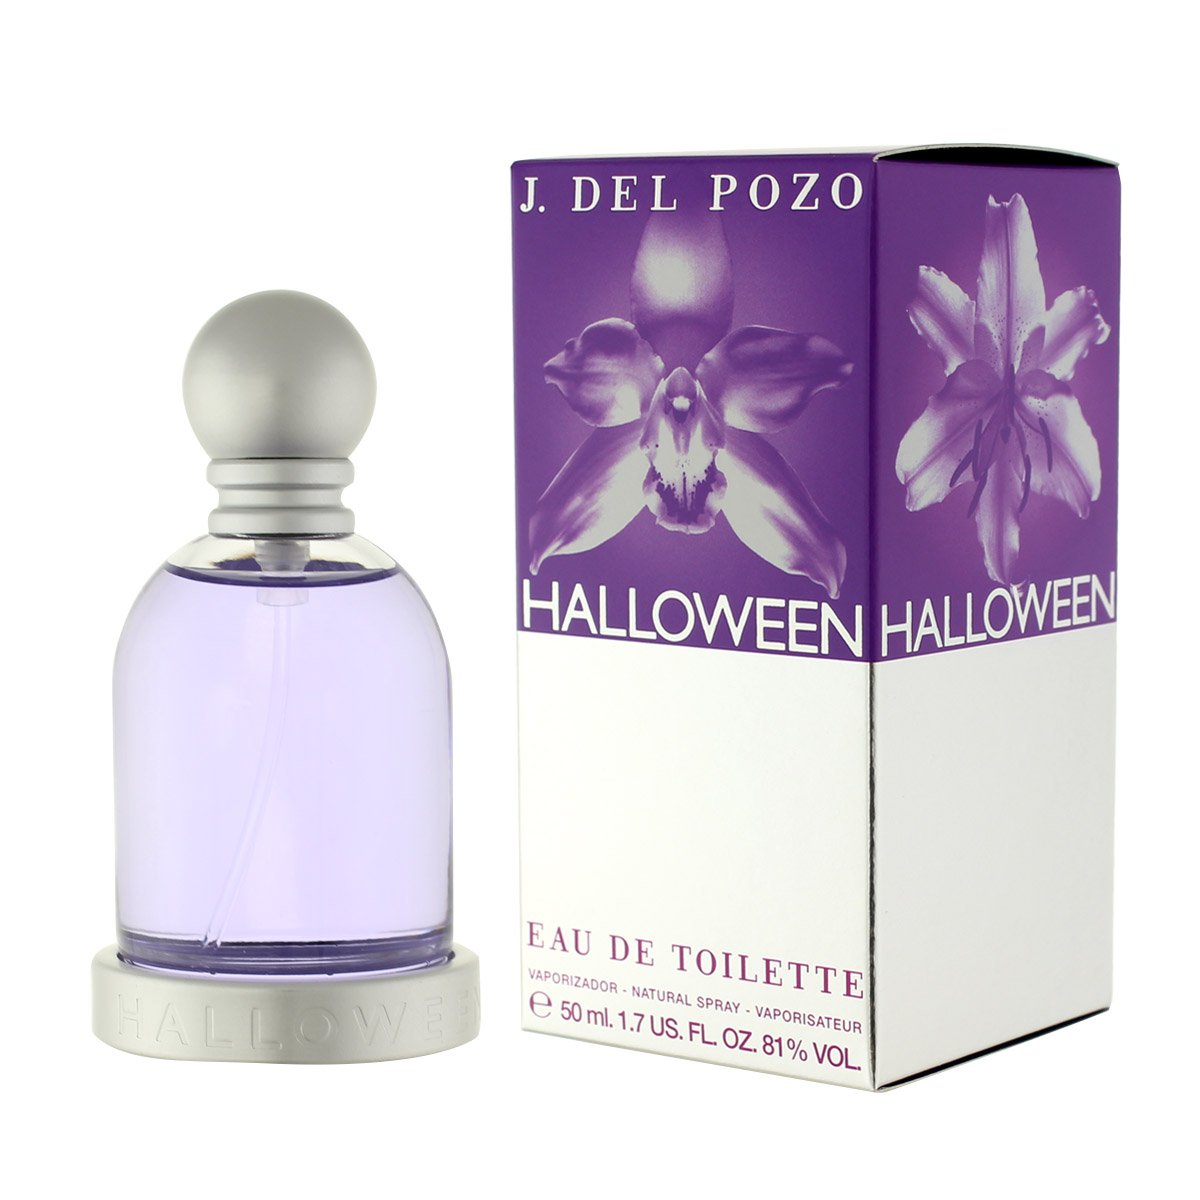 <span data-mce-fragment="1">Wear this hauntingly beautiful Halloween eau de toilette spray to evoke a magical mood. Launched in 1997 by Max Gavarry, this powdery floral composition for women lifts your spirits year round, starting with a memorable opening-note combination of banana leaf and violet. A heart of pepper gives it a spicy edge, while the base couples sandalwood with aromatic incense for a finish that clings to the skin, providing a exotic backdrop for your nocturnal adventures.</span>